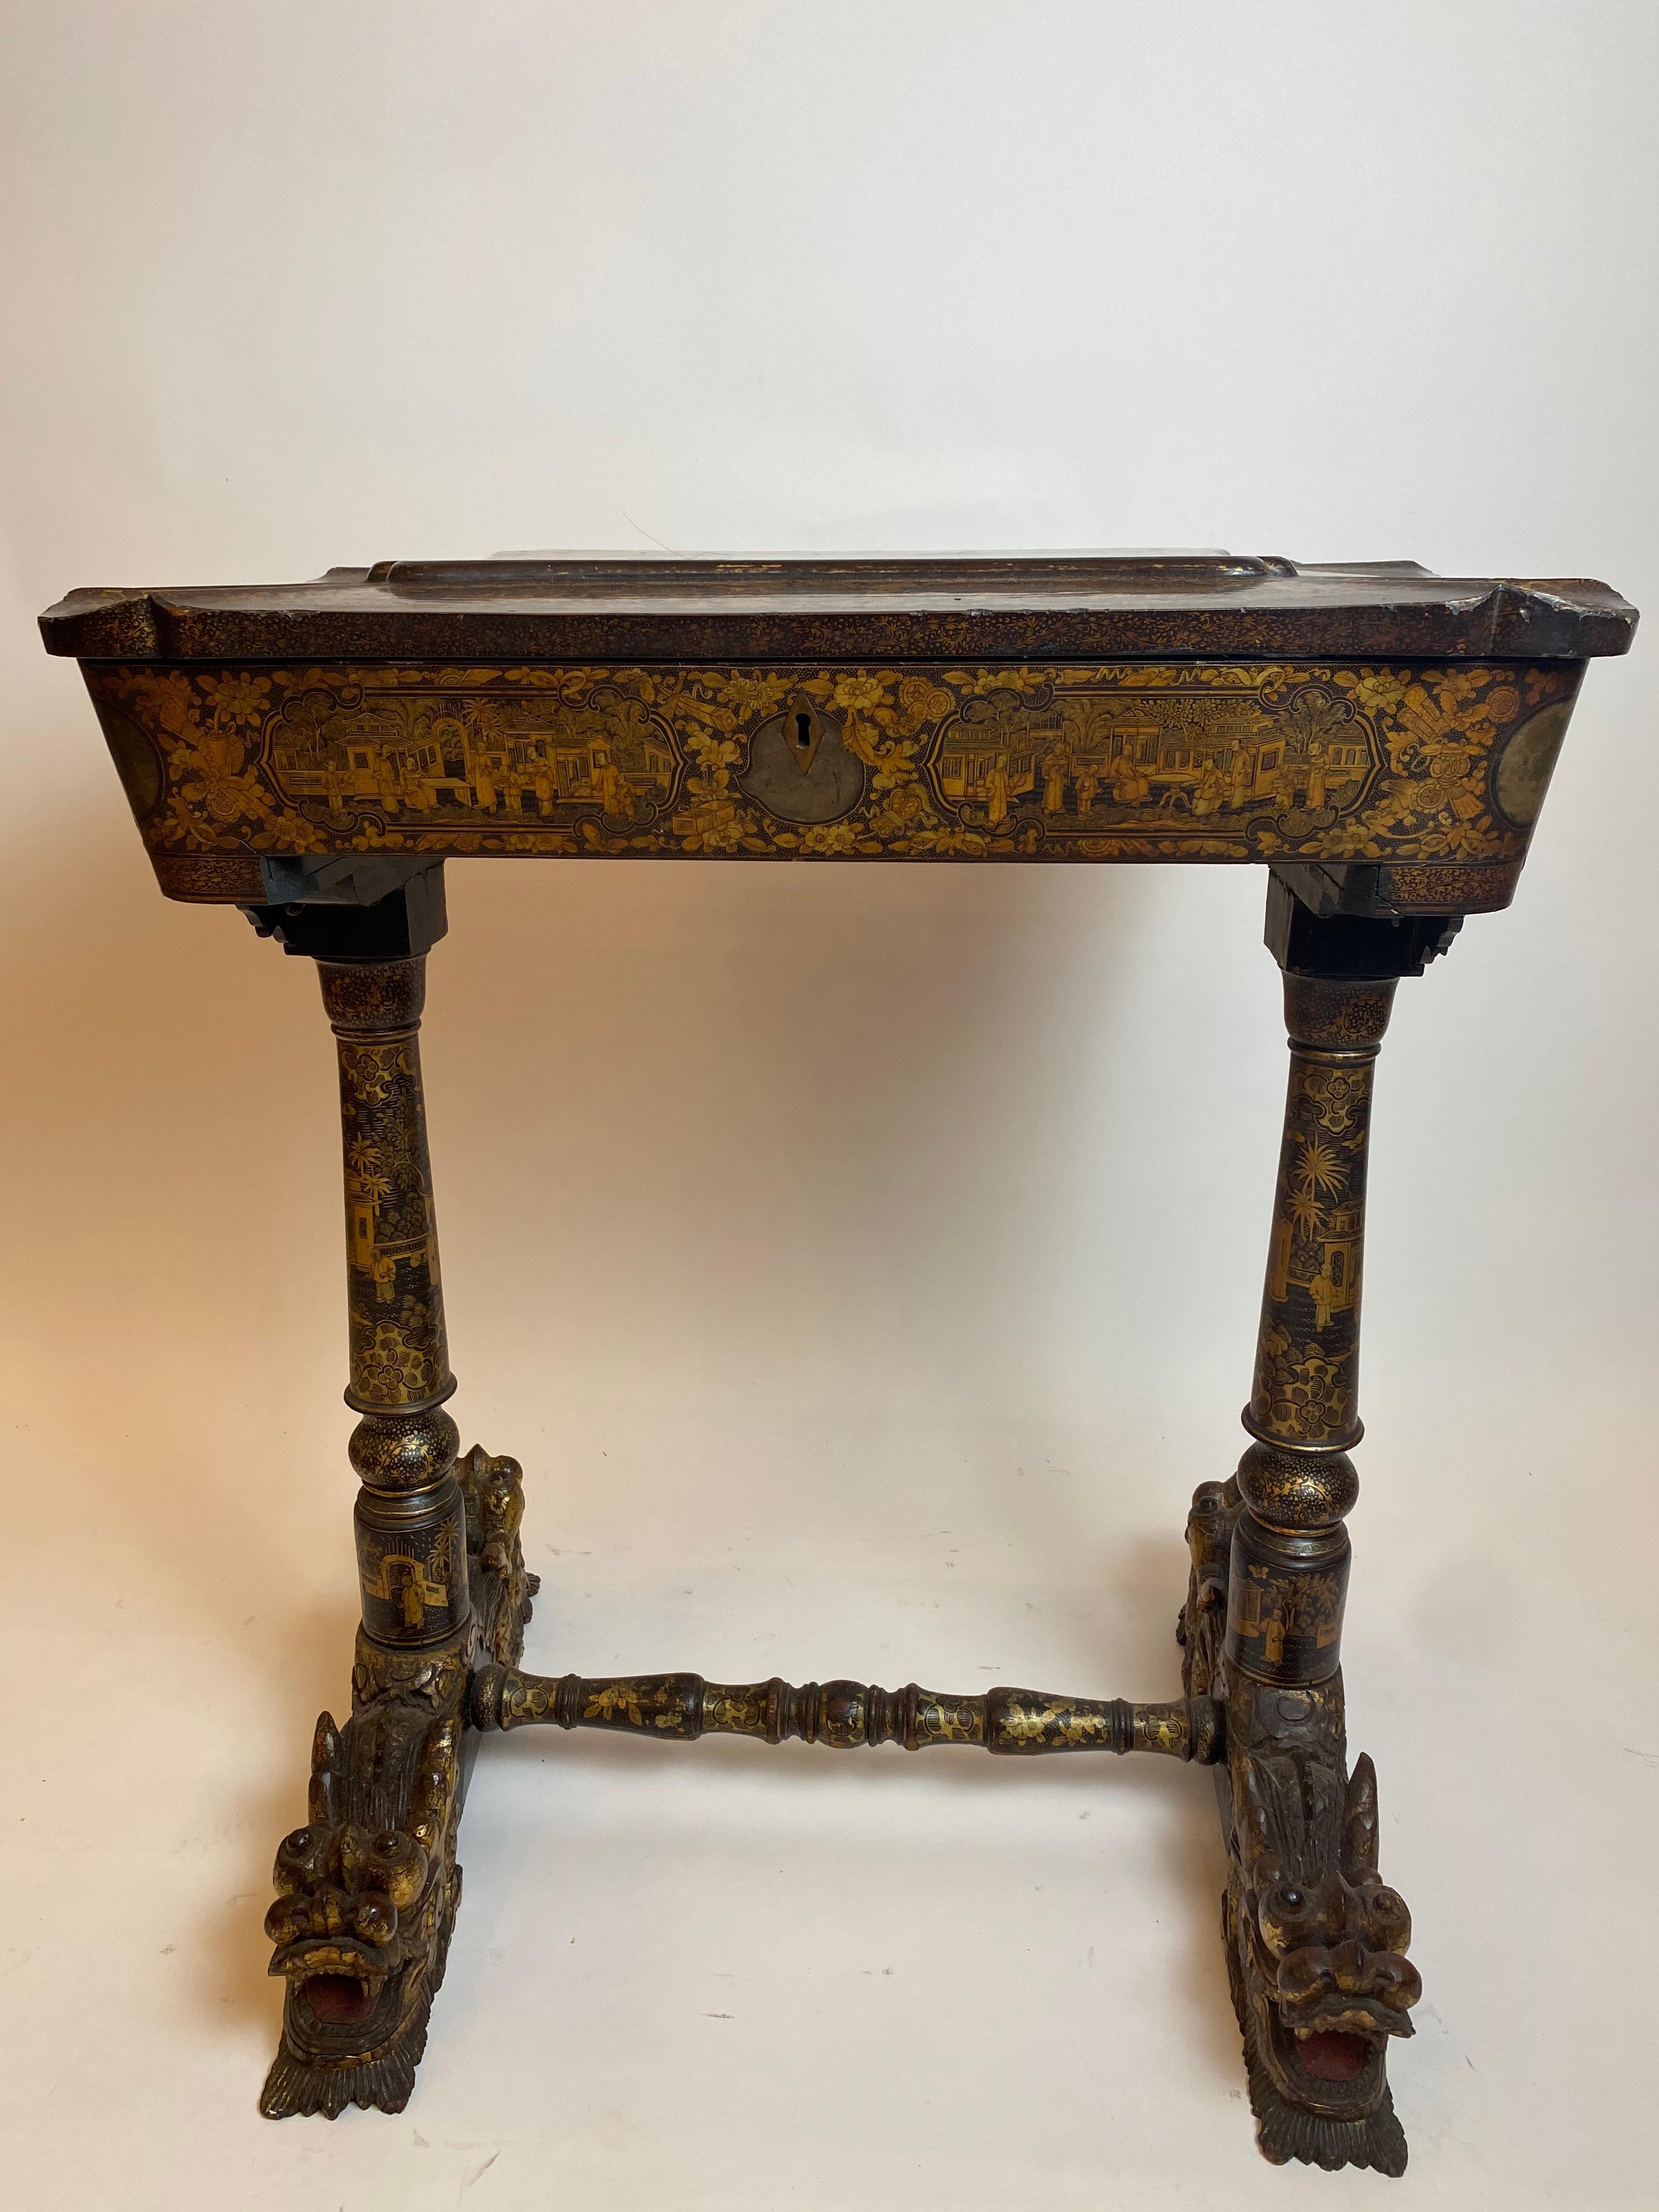 Early 19th Century Chinese Export Lacquer and Gilt Work Table In Good Condition For Sale In Brea, CA